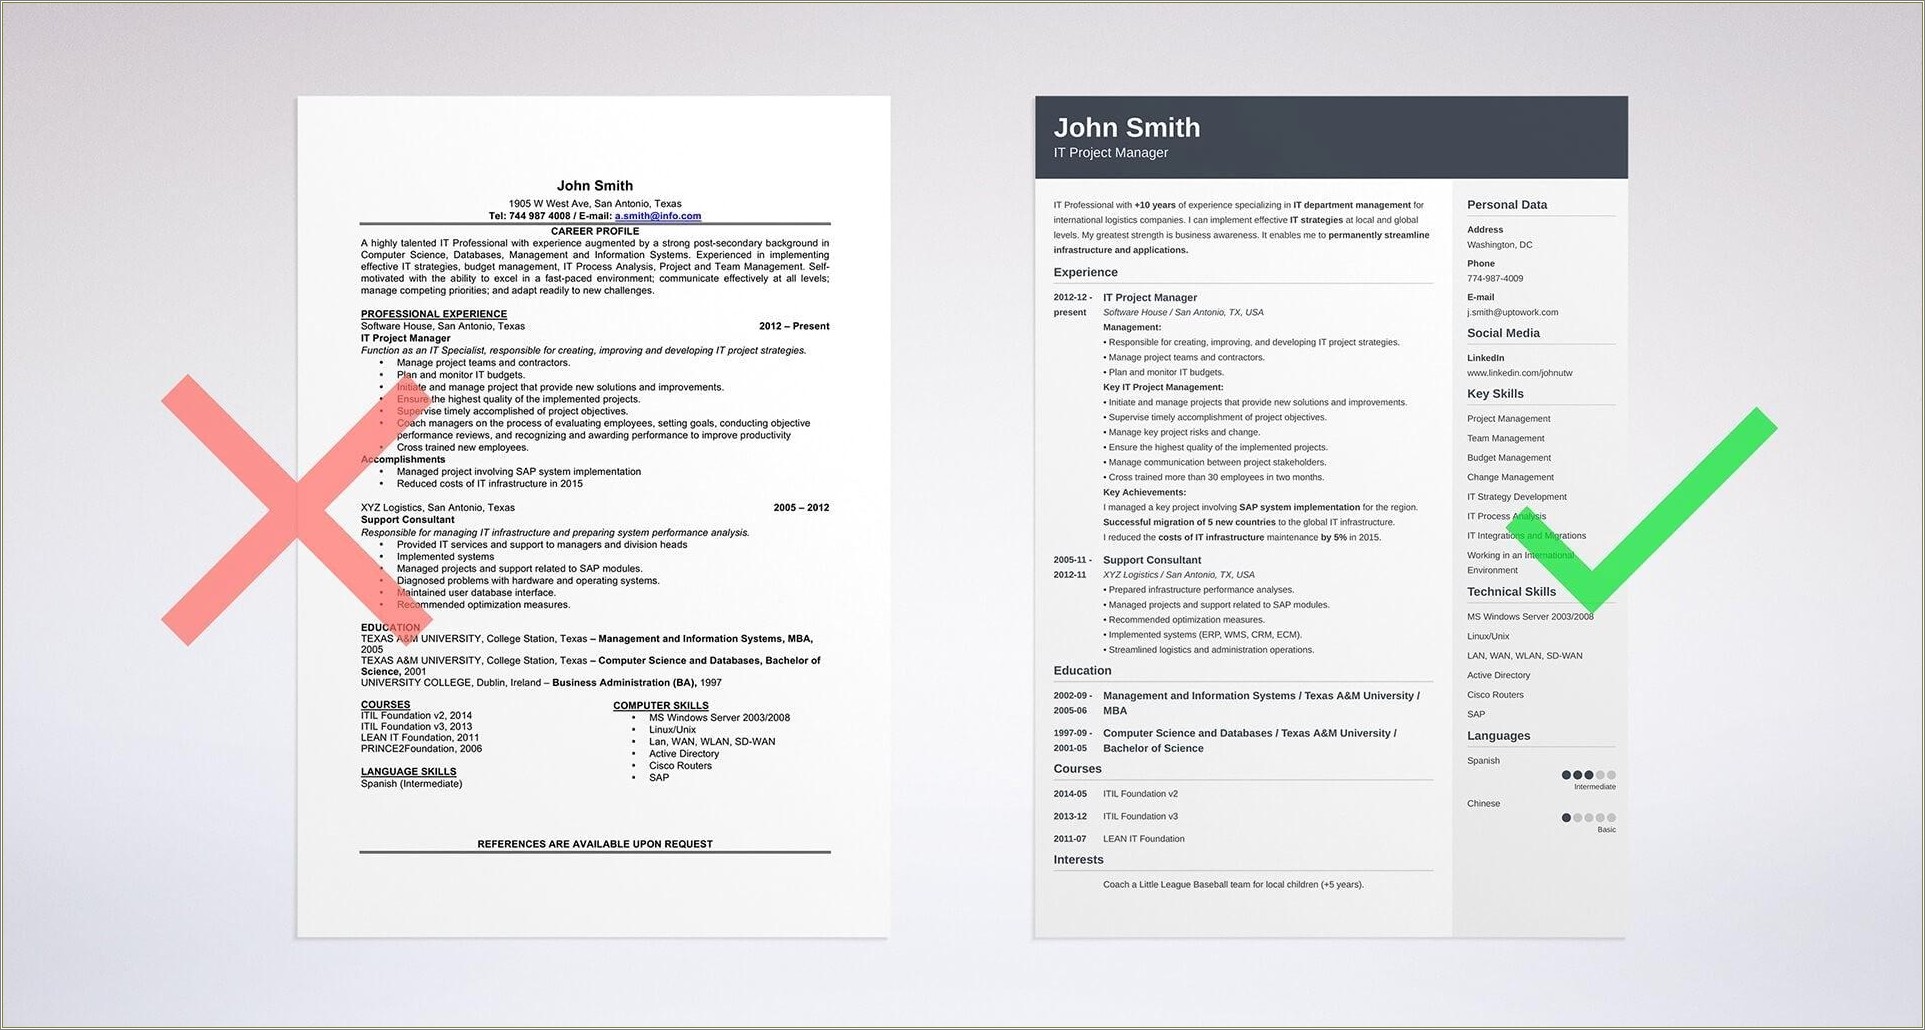 Should A Professional Resume Have An Objective